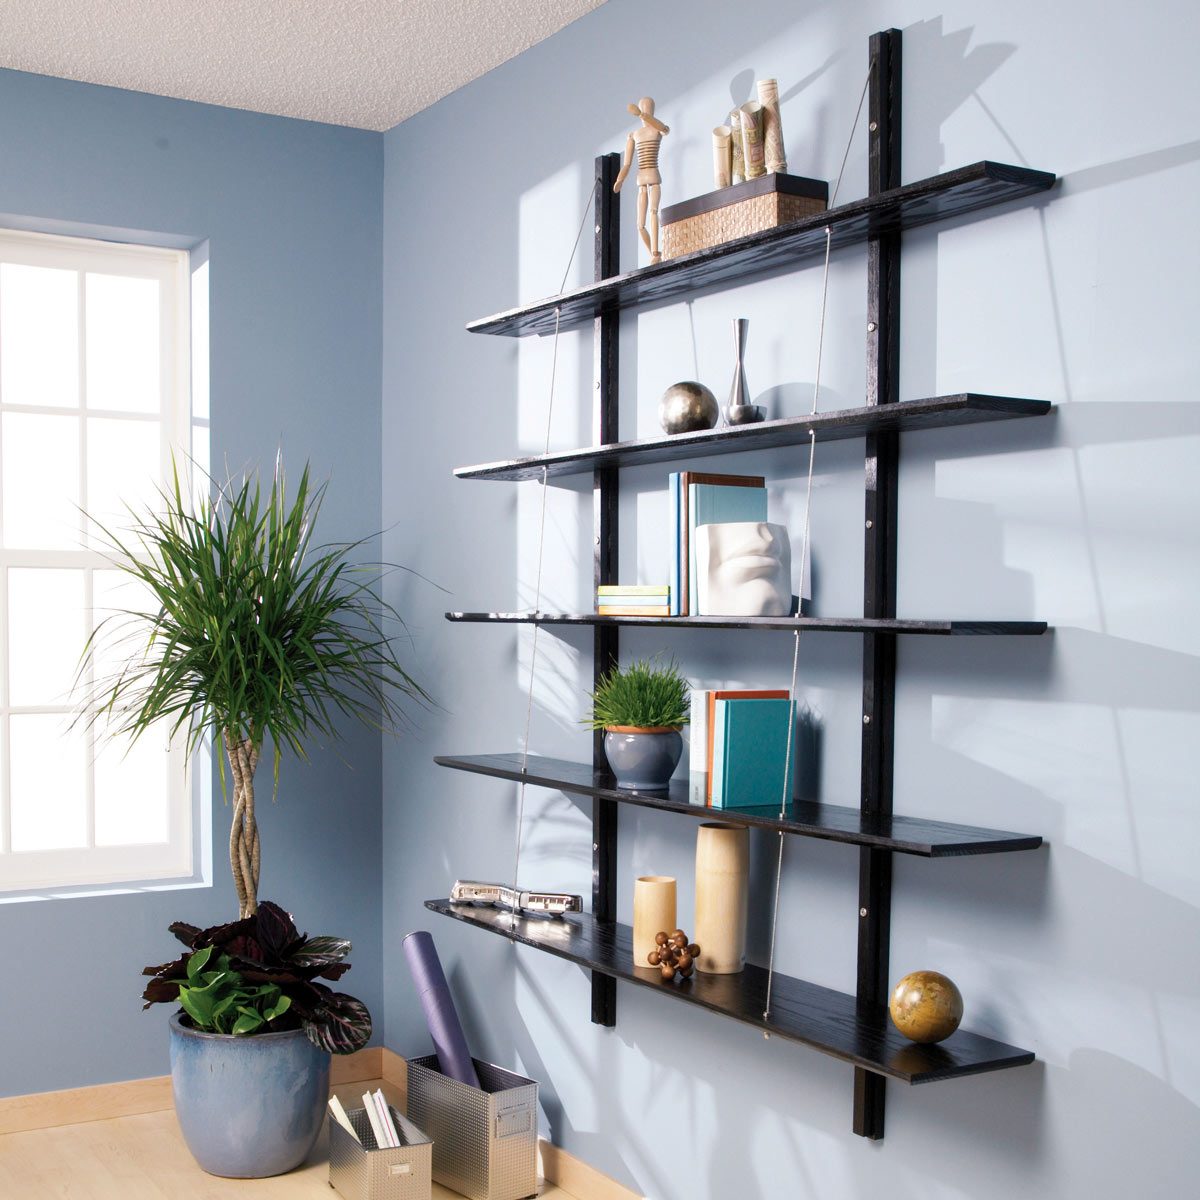 33 Bookcase Projects And Building Tips The Family Handyman